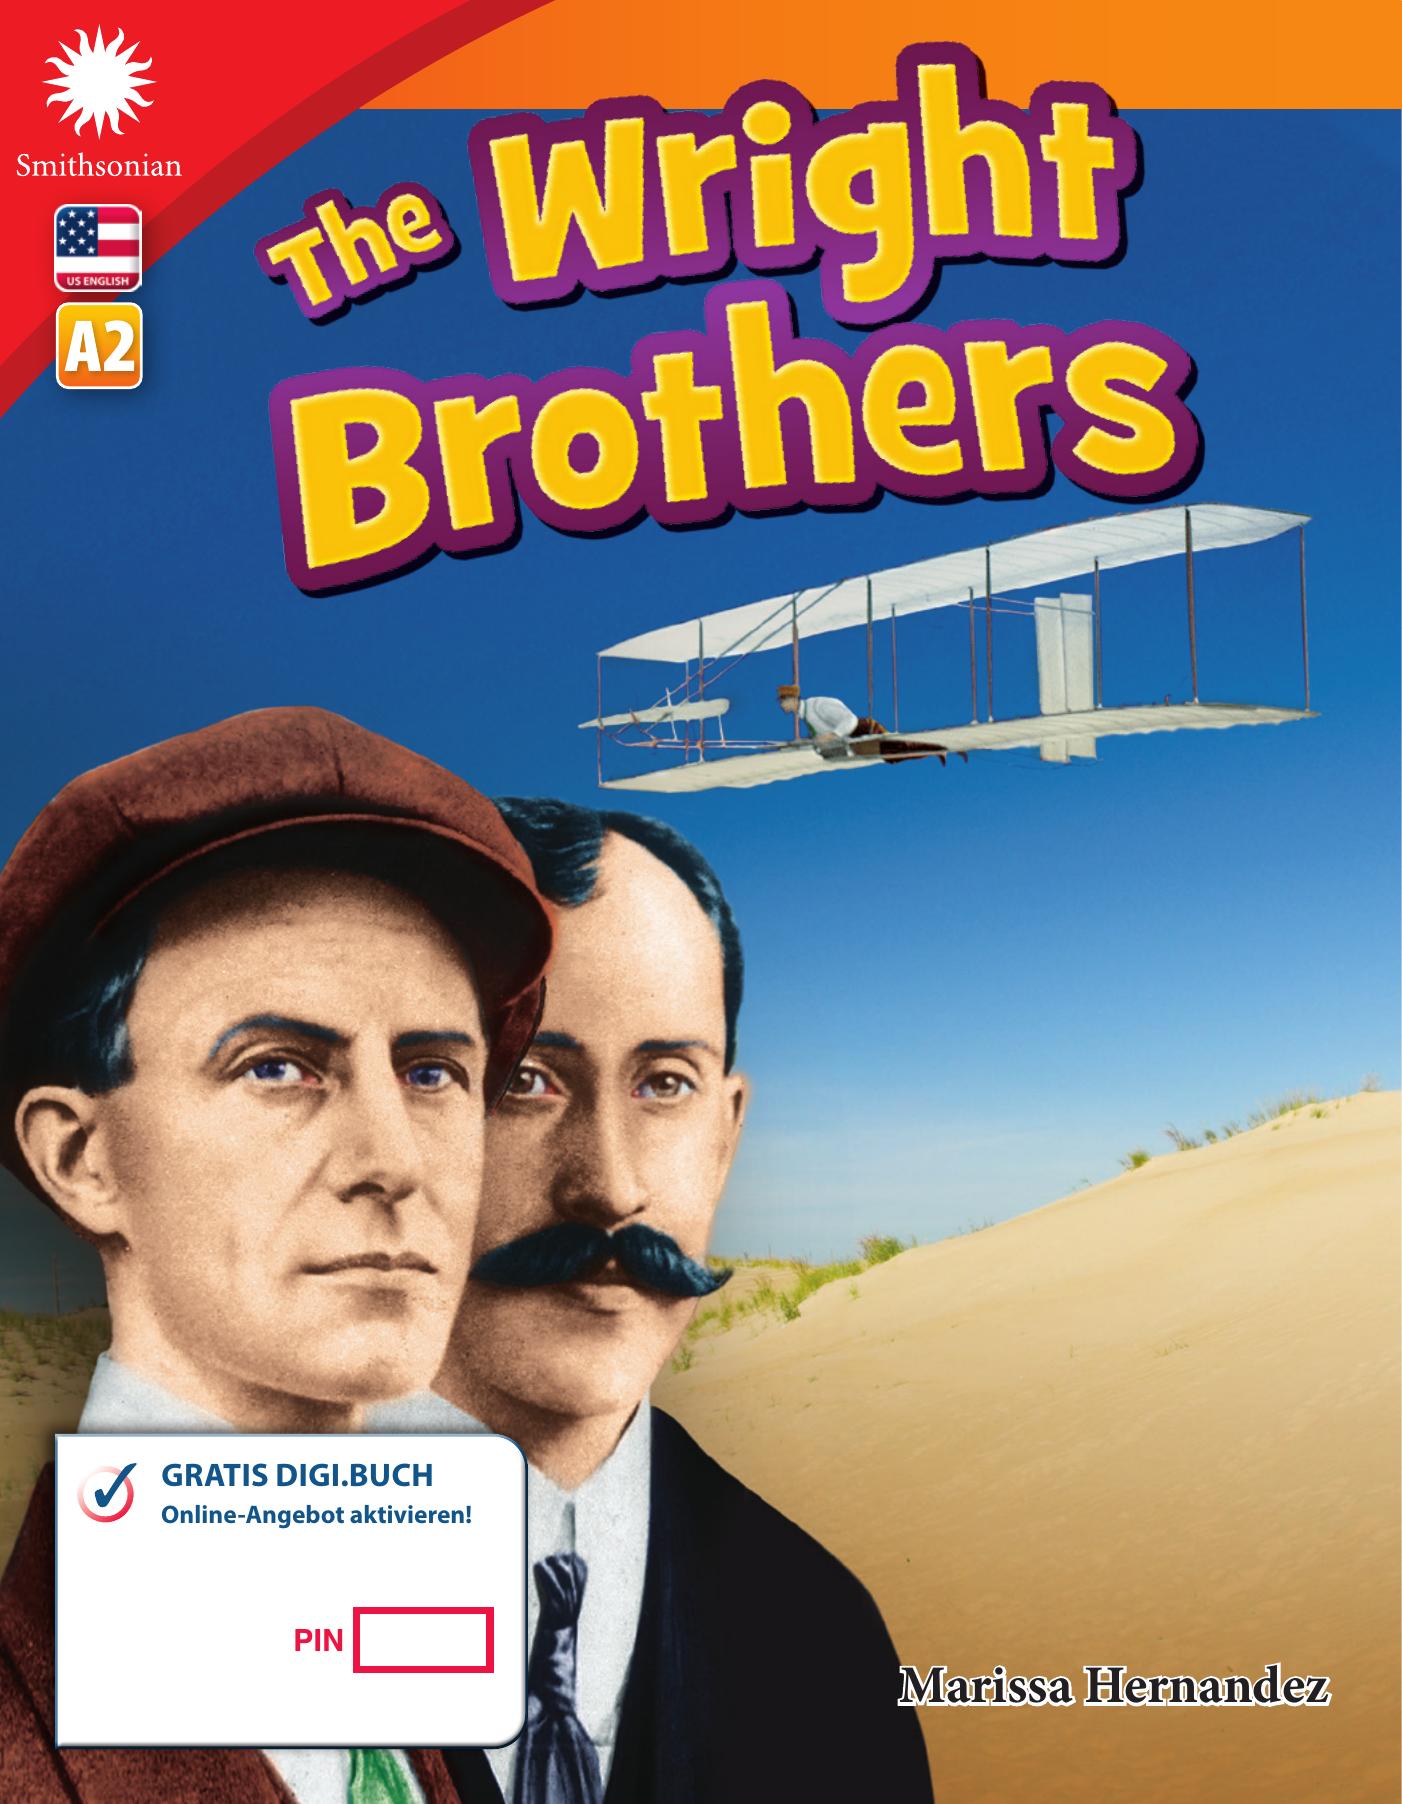 A2 – The Wright Brothers